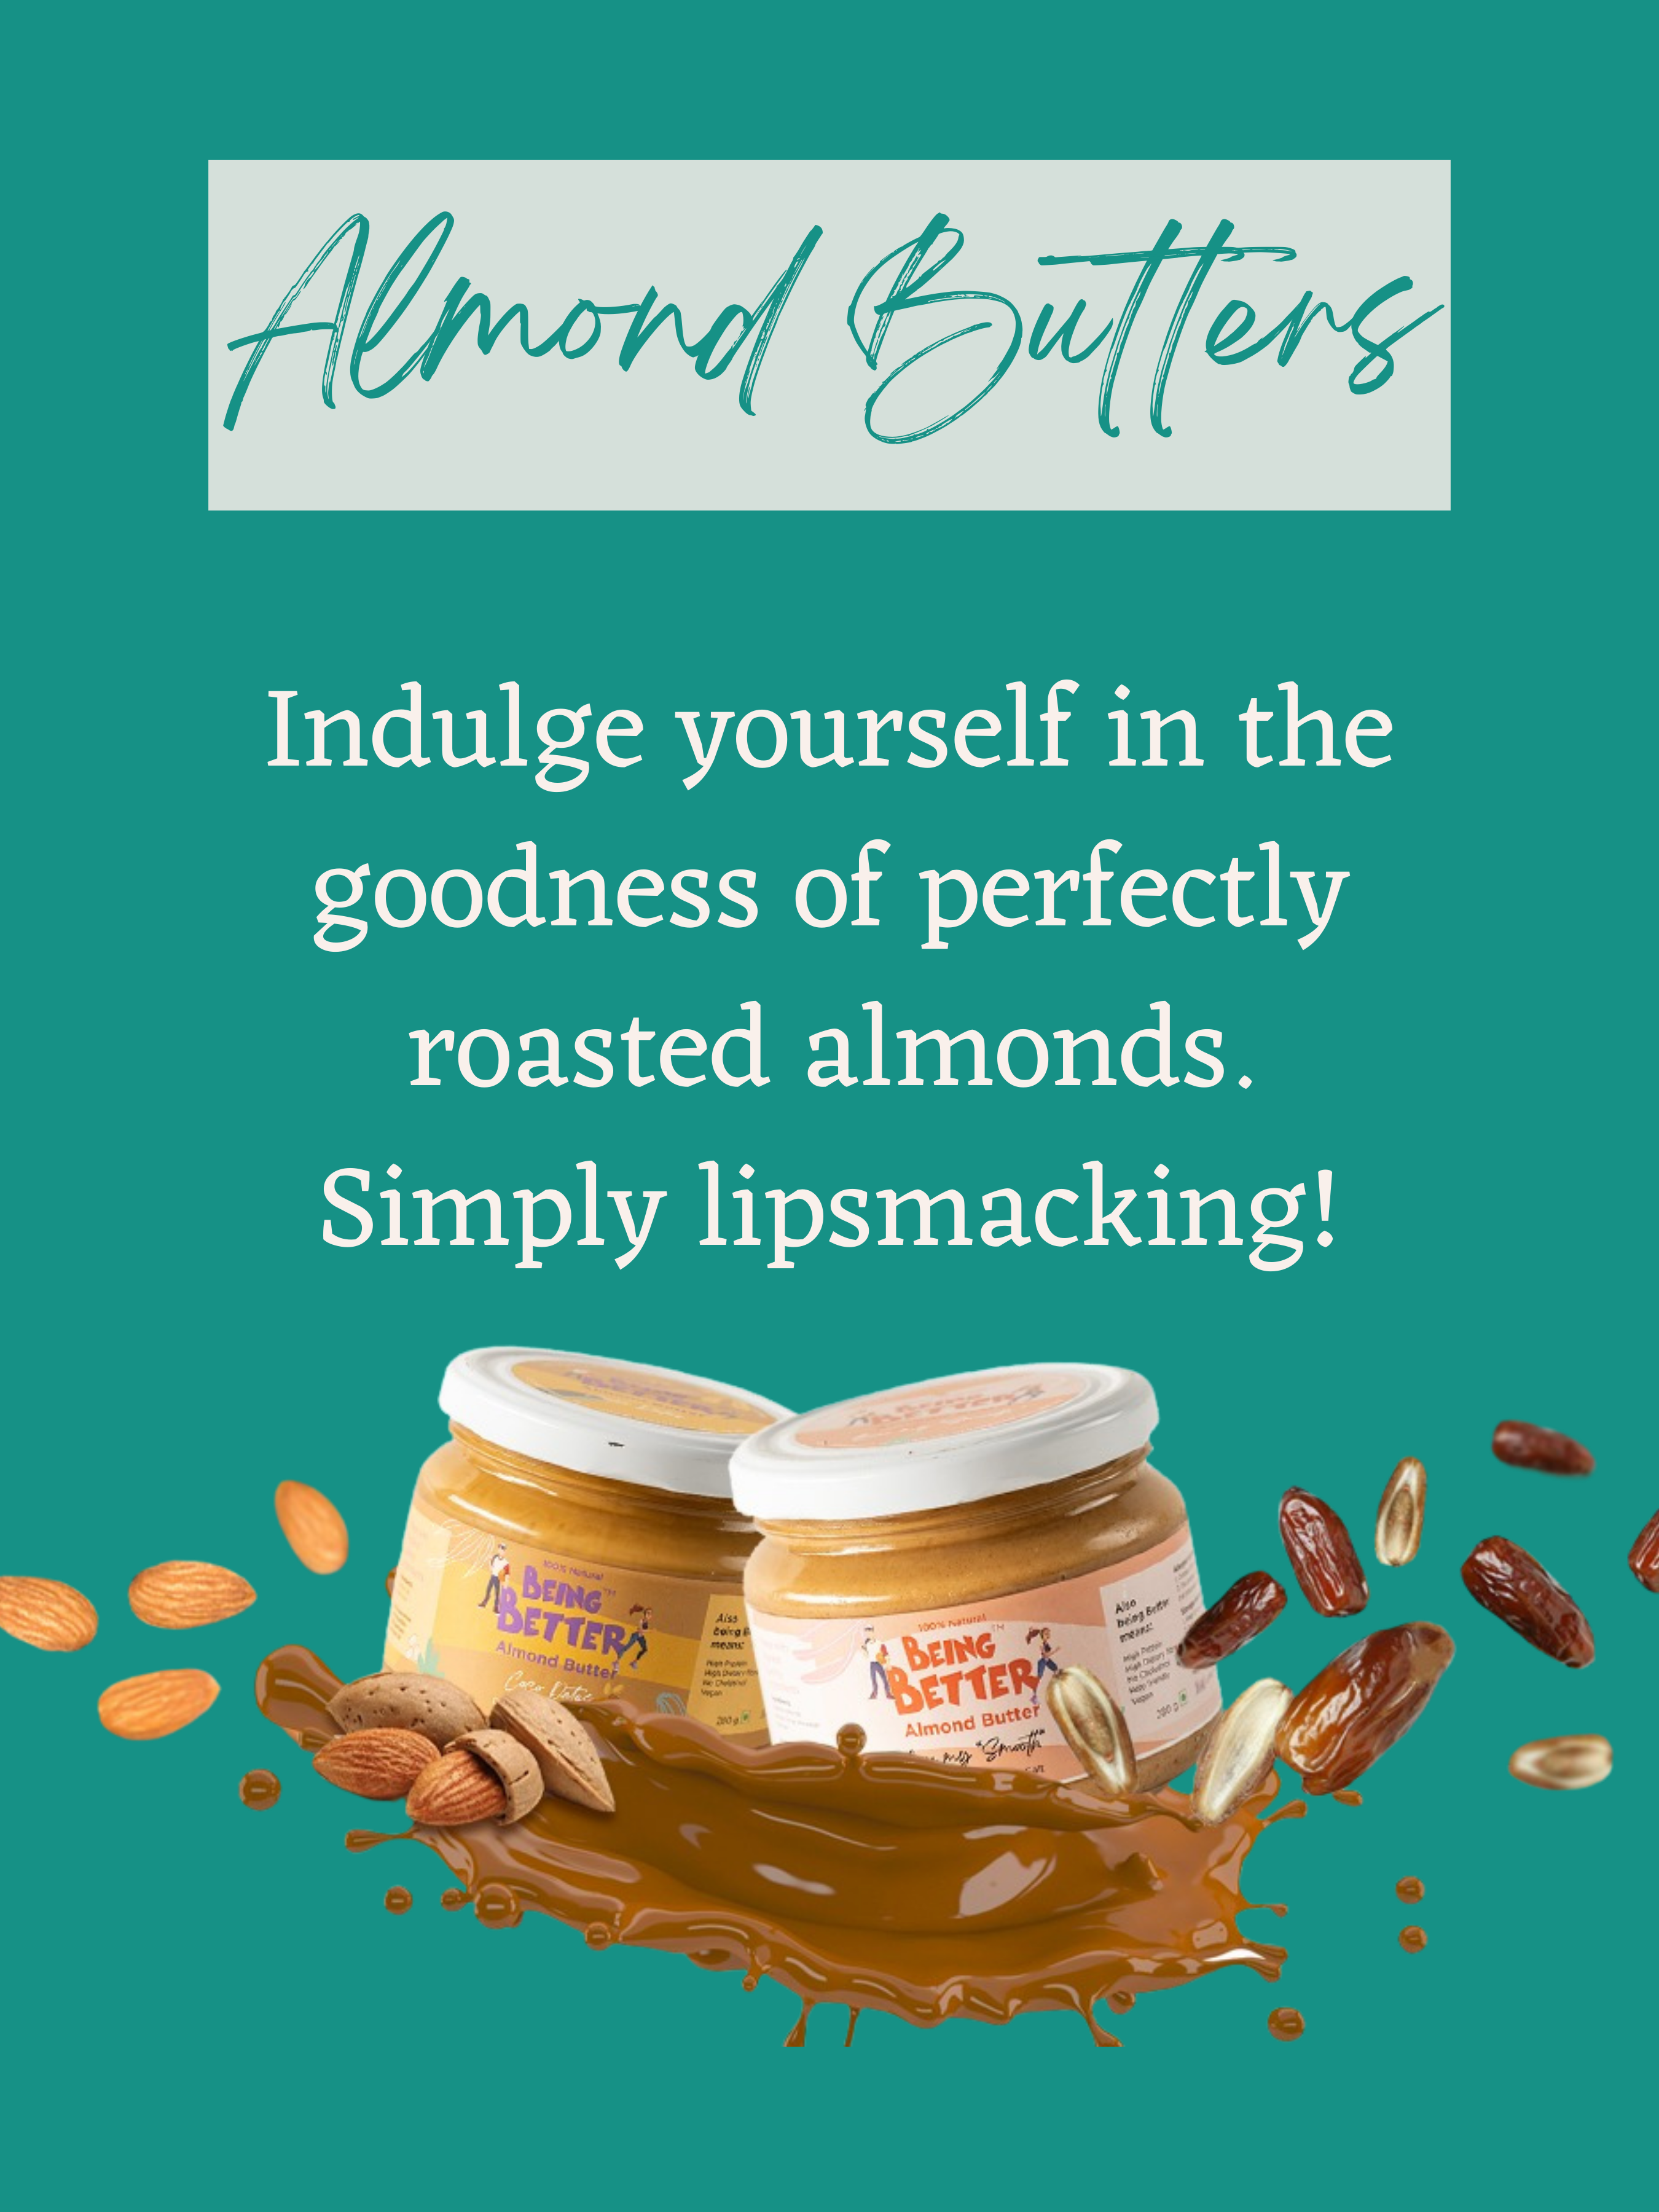 Almond Butter Coco Dates and Bee My Smooth and splashing of Almond Butter